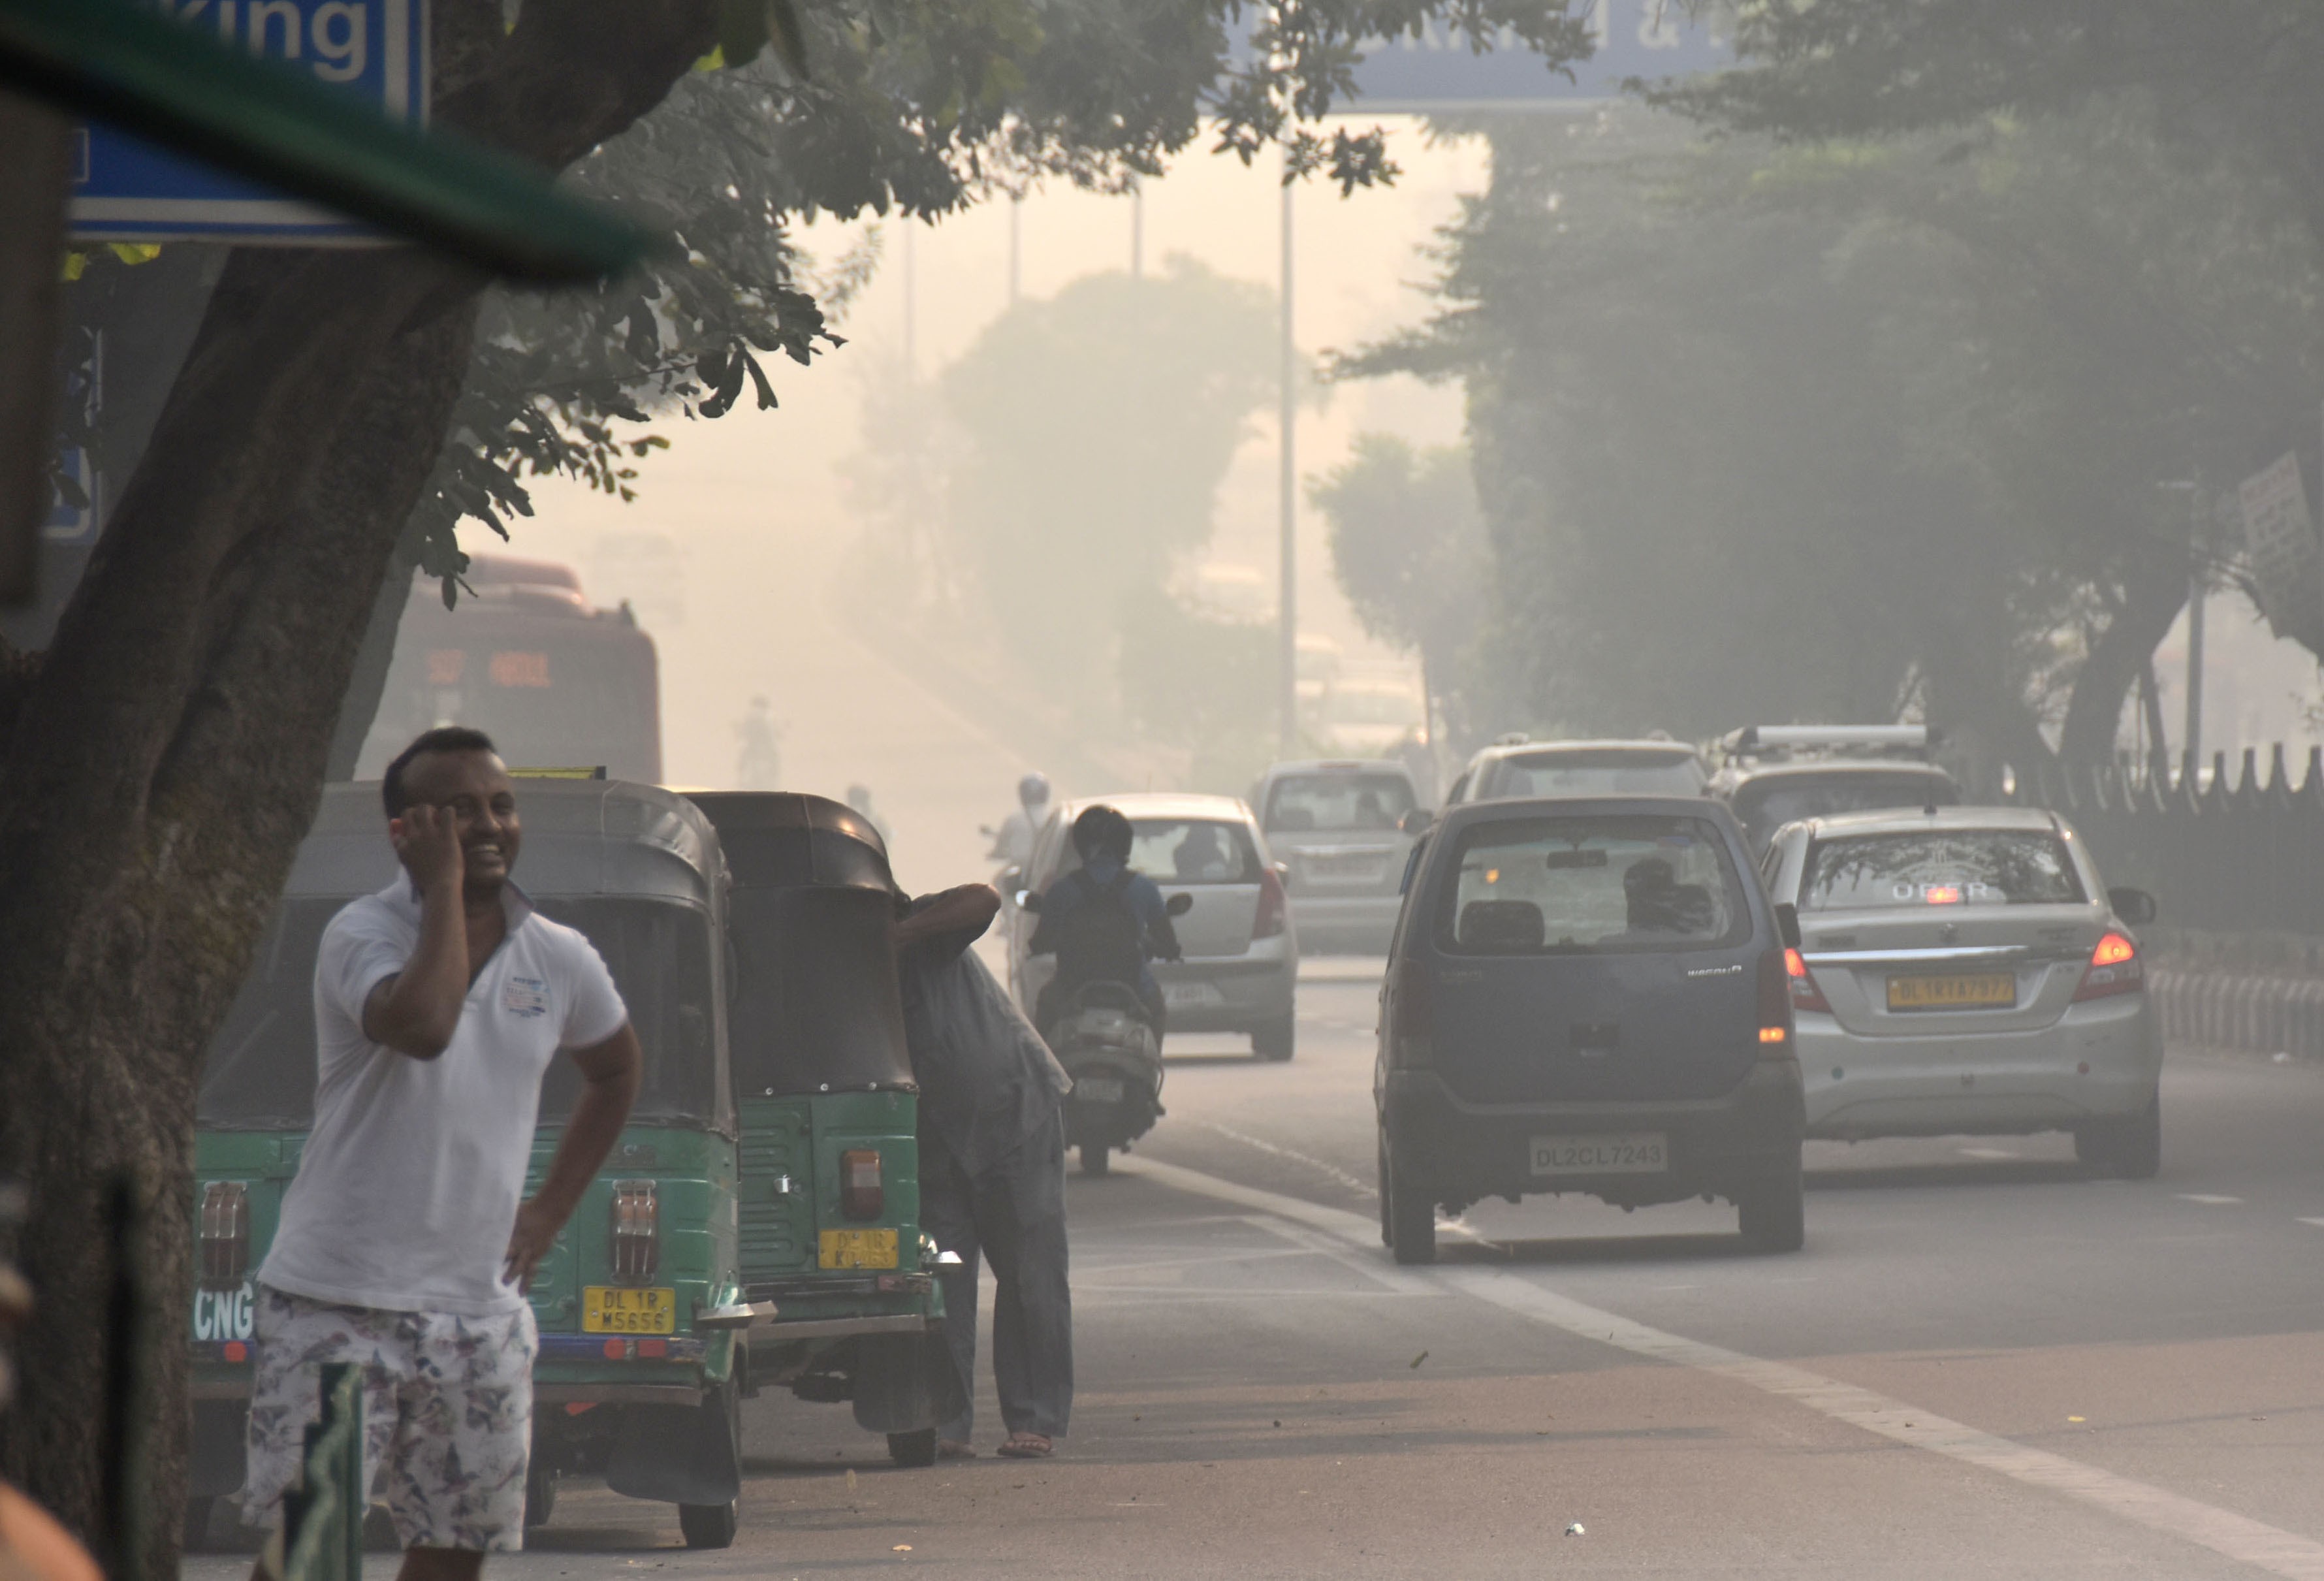 The 10 Cities With The Worst Air Pollution All Have One Thing In Common Vice News 6807